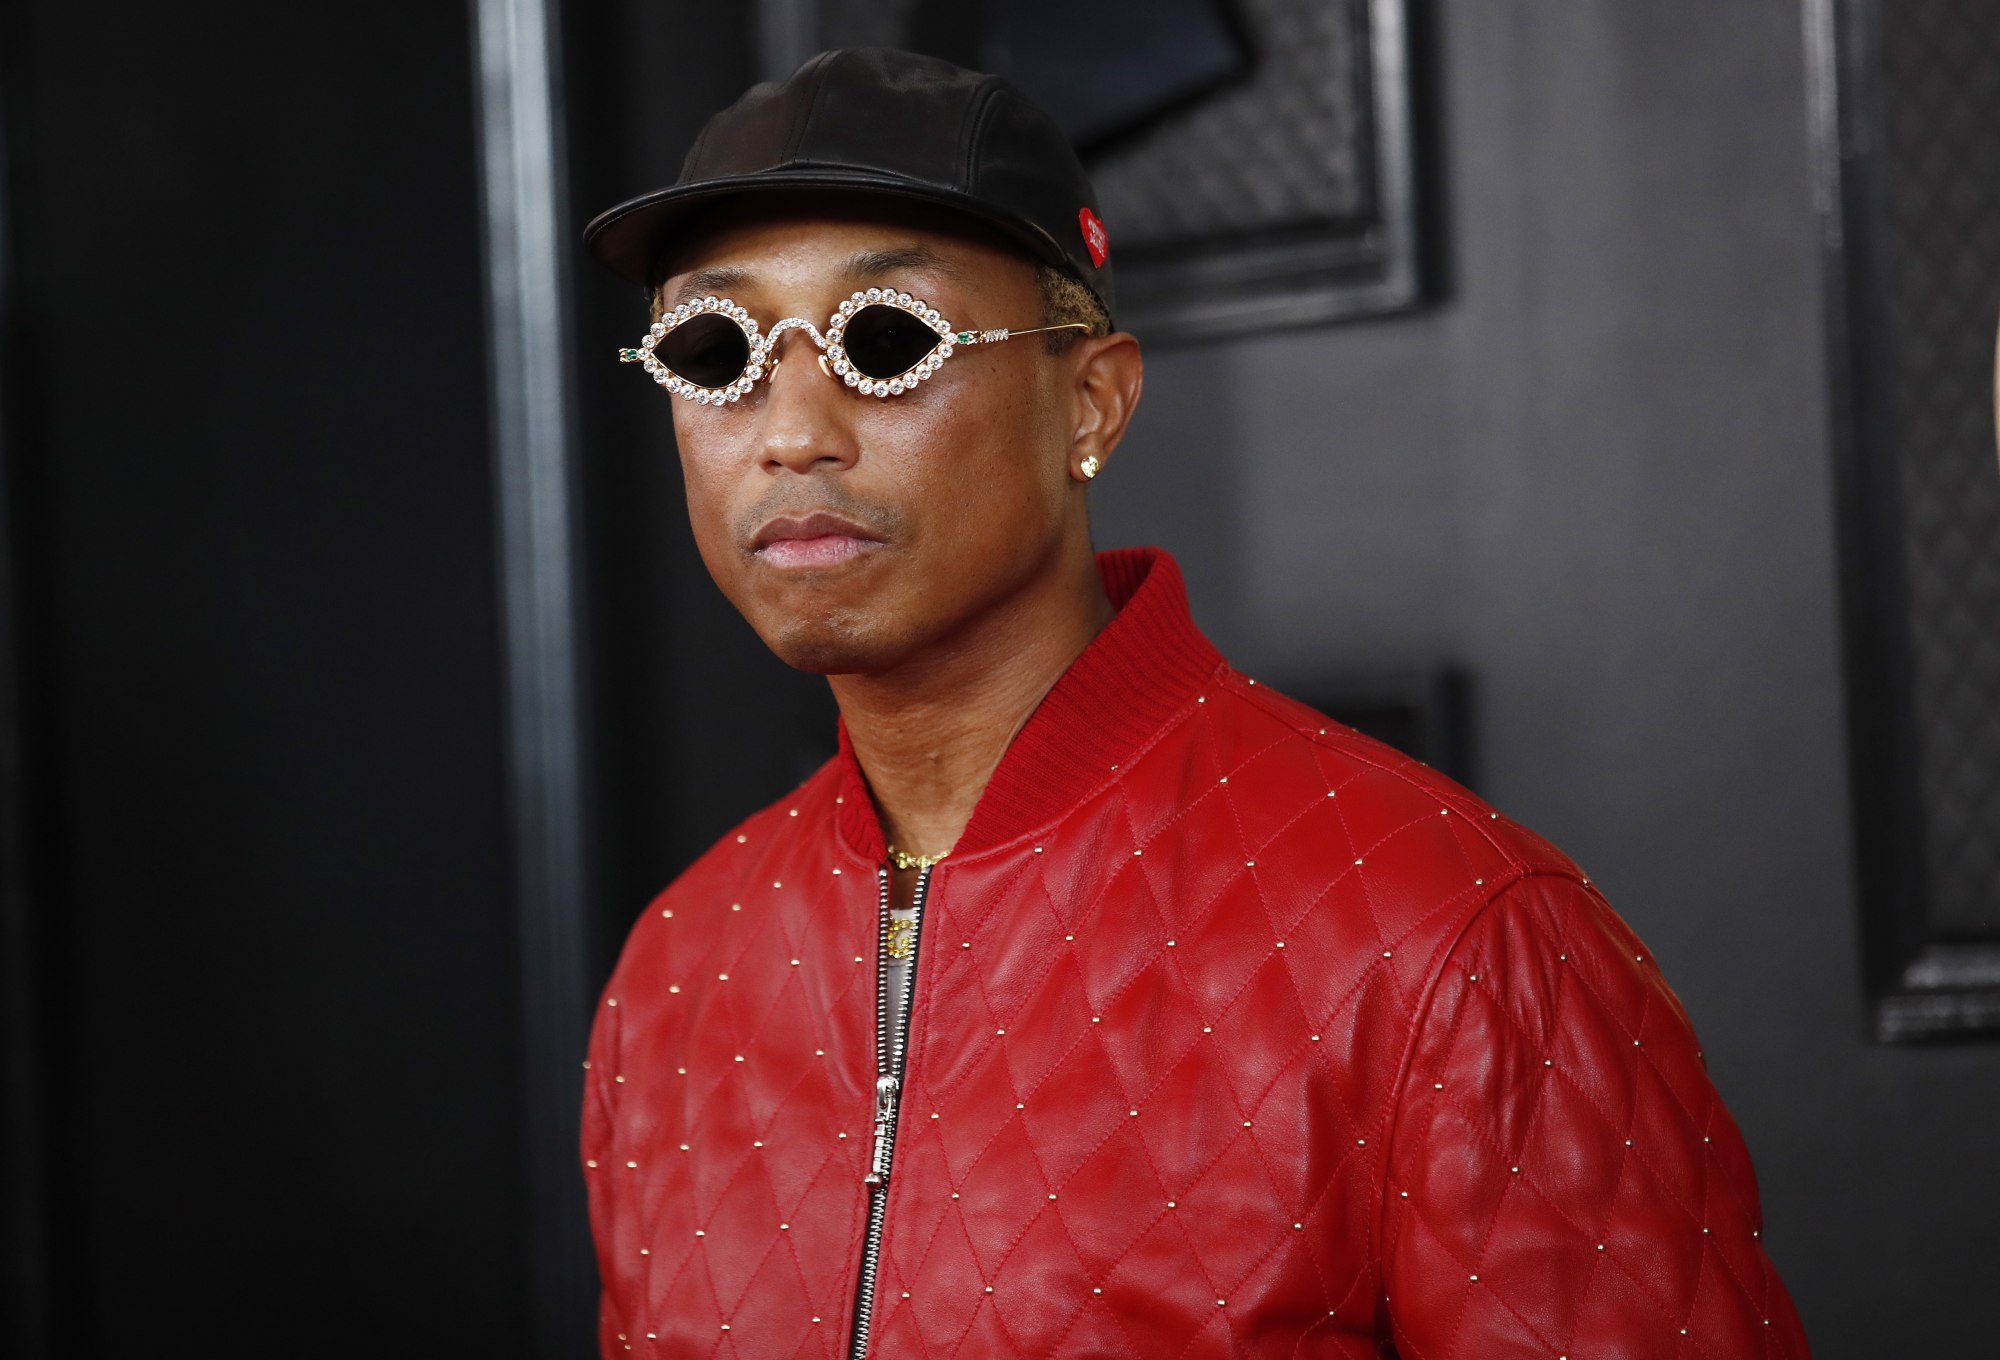 Louis Vuitton picks Pharrell Williams as creative director of menswear,  continuing the luxury label's links with pop culture and music